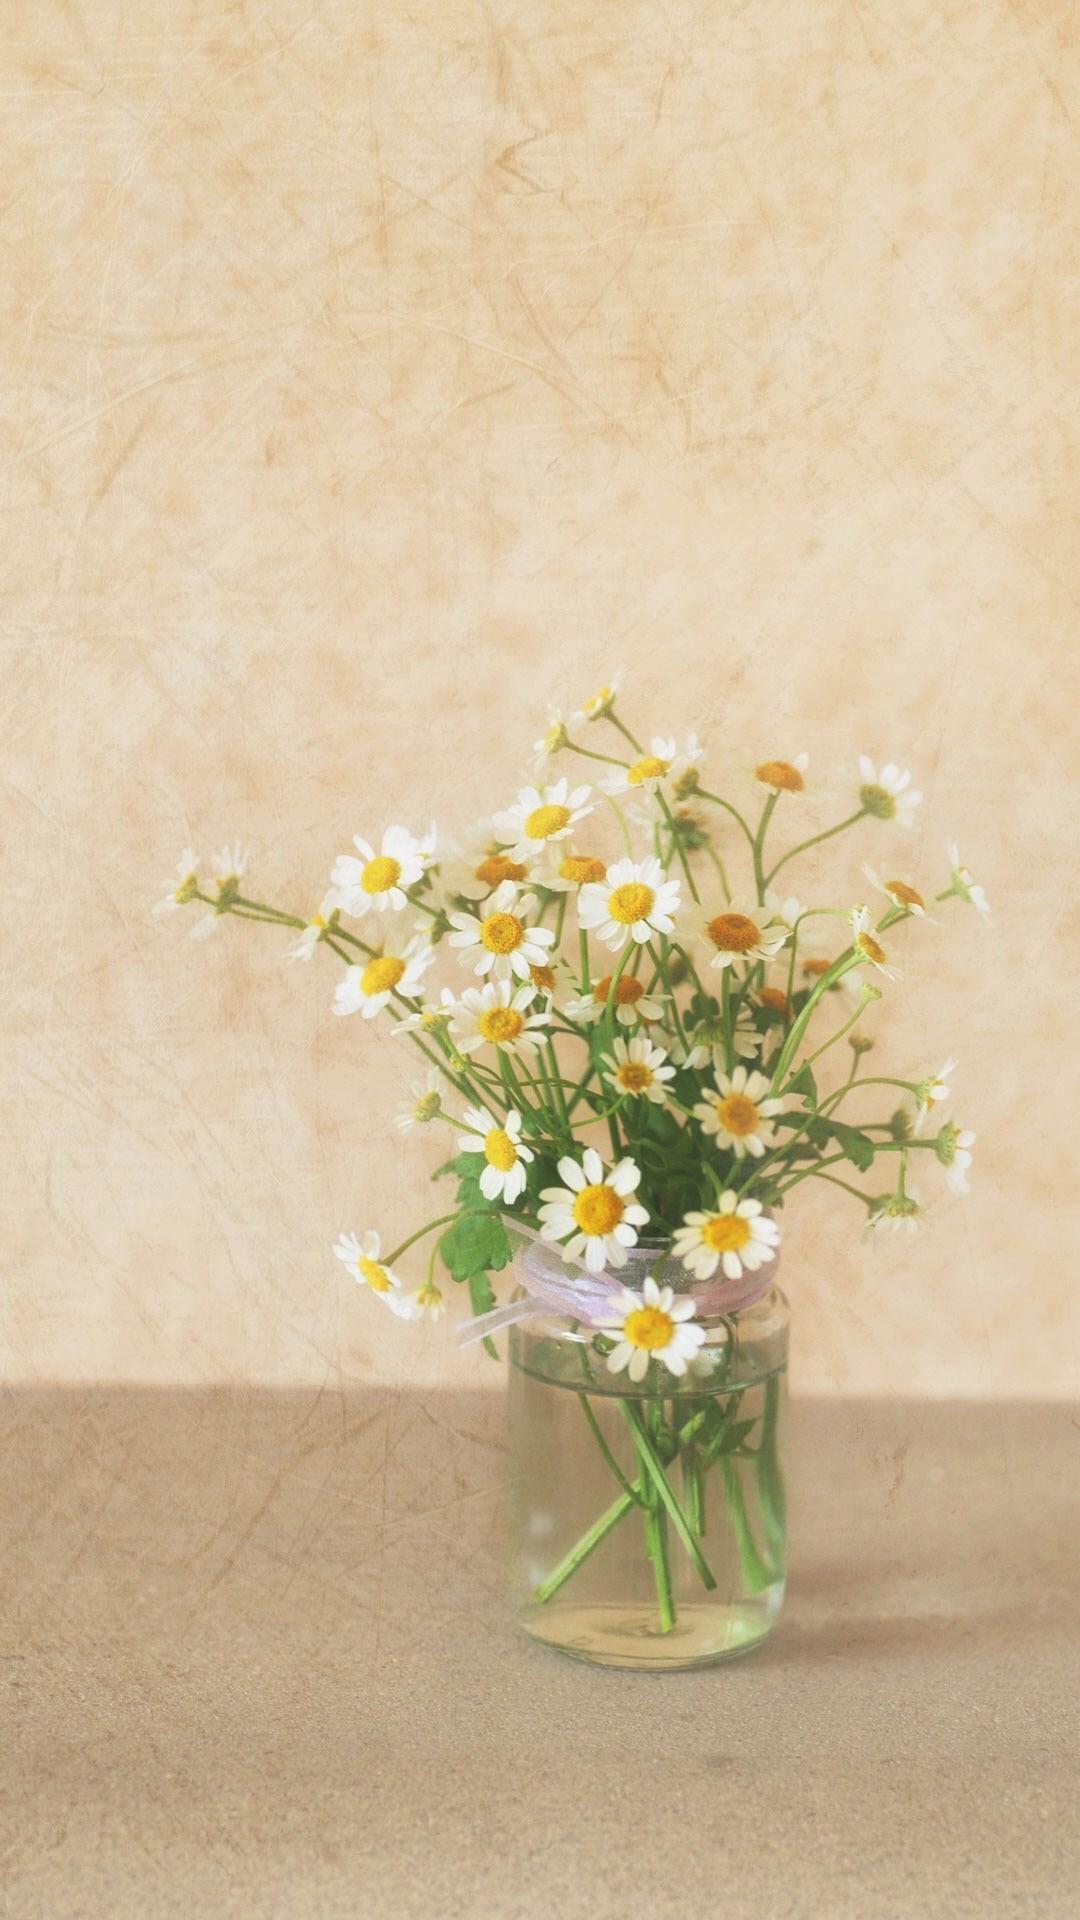 Simple Flower Wallpapers - Wallpaper Cave